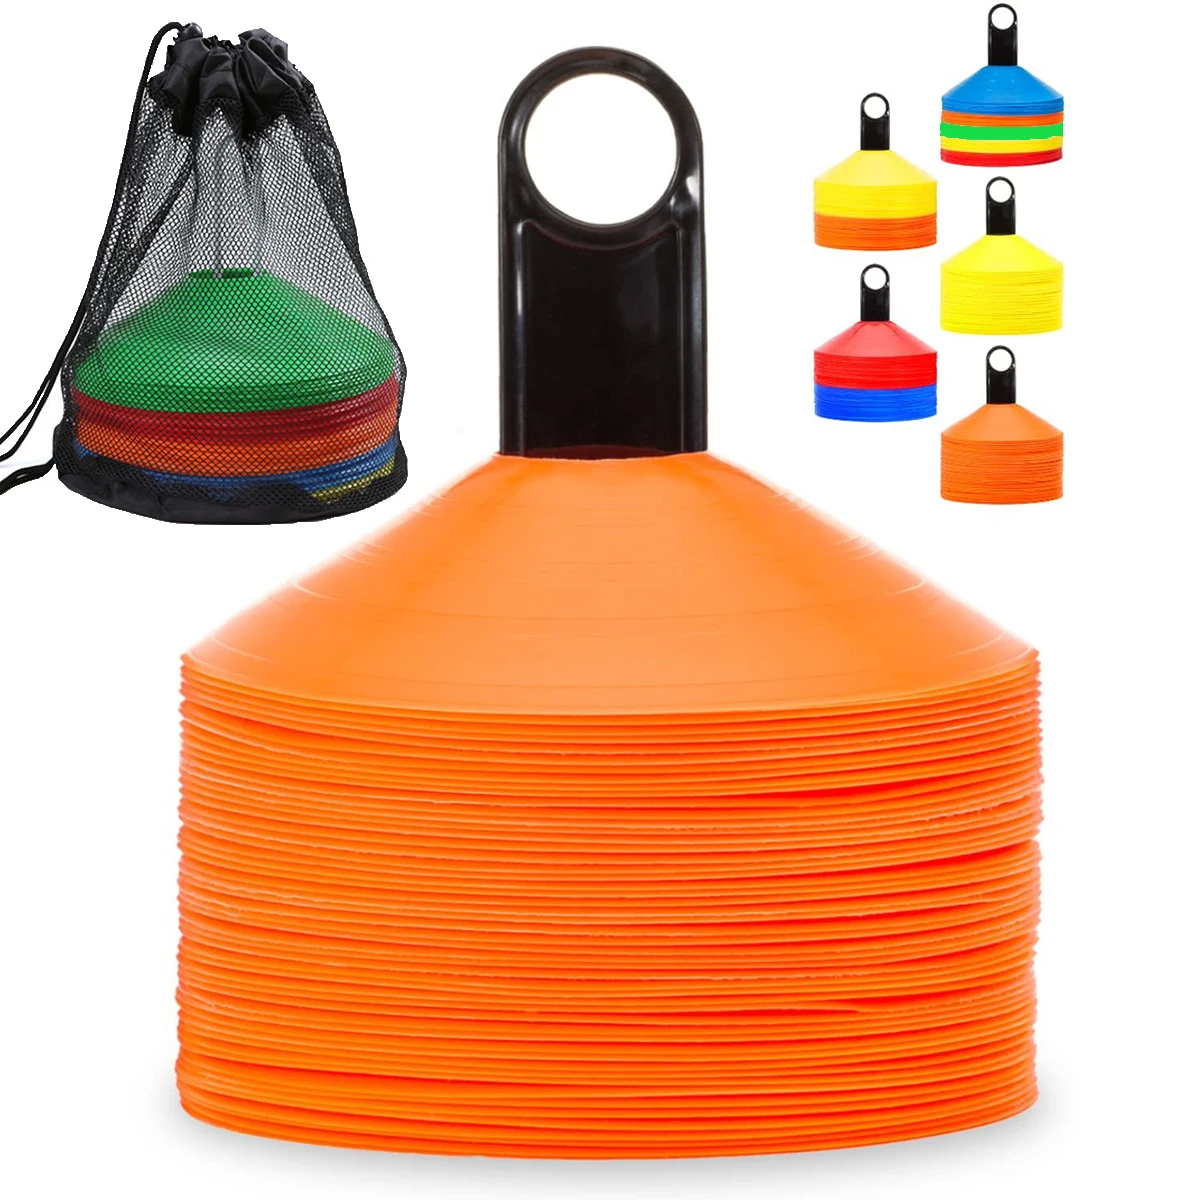 IROCH 50 Pack Soccer Cones Disc Cone Sets with Holder and Bag for Training,Field Cone Markers Football,Kids,Sports 